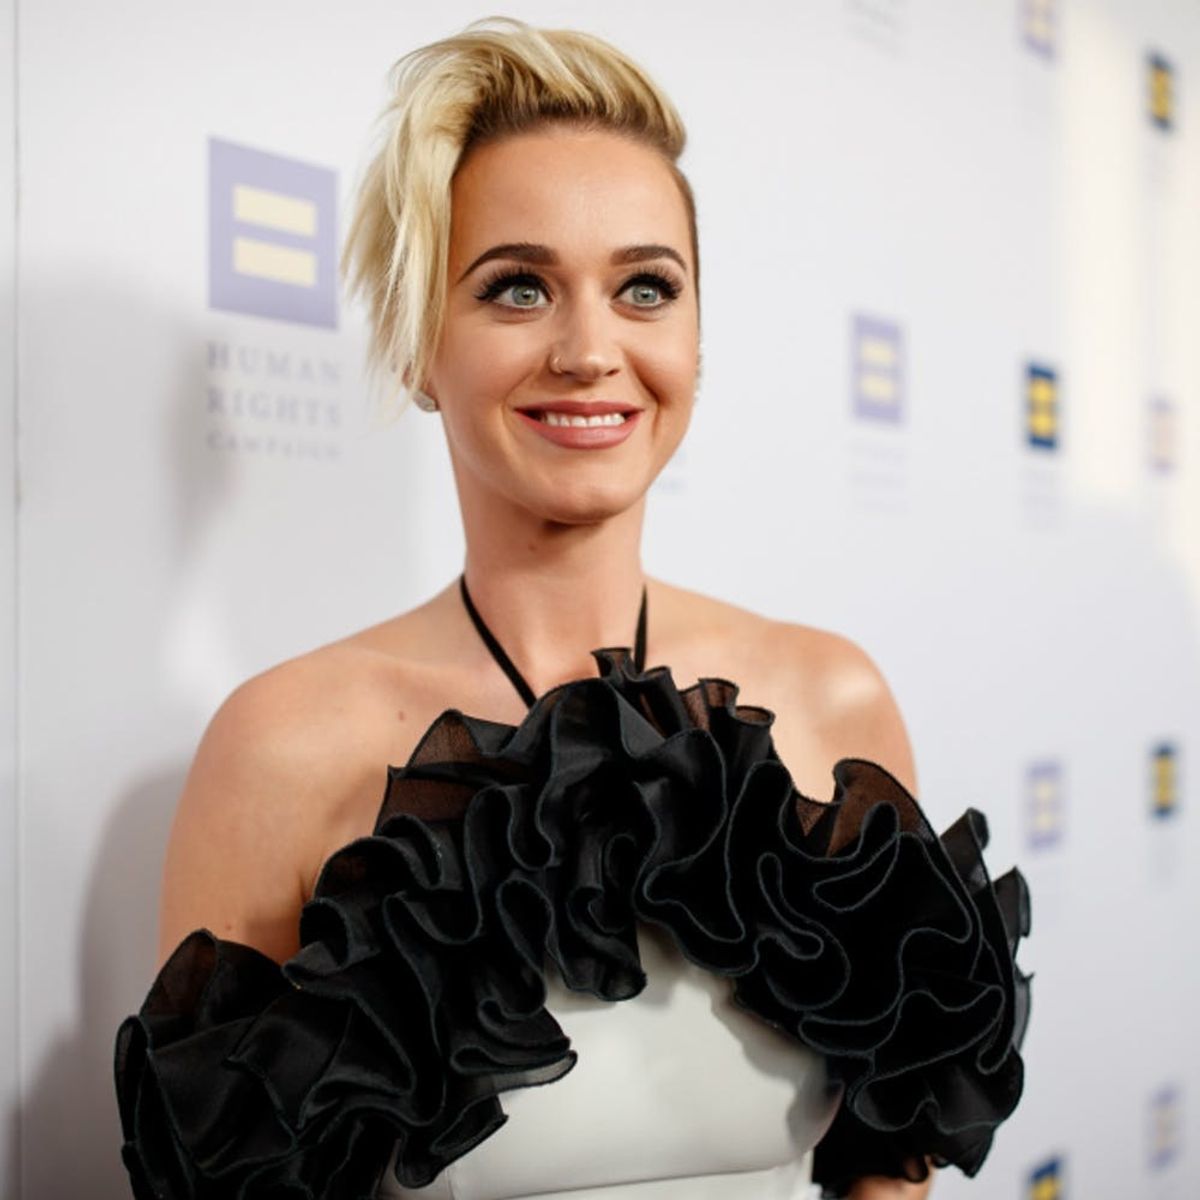 Katy Perry Is Dropping a New Single and It’s Coming Tomorrow!